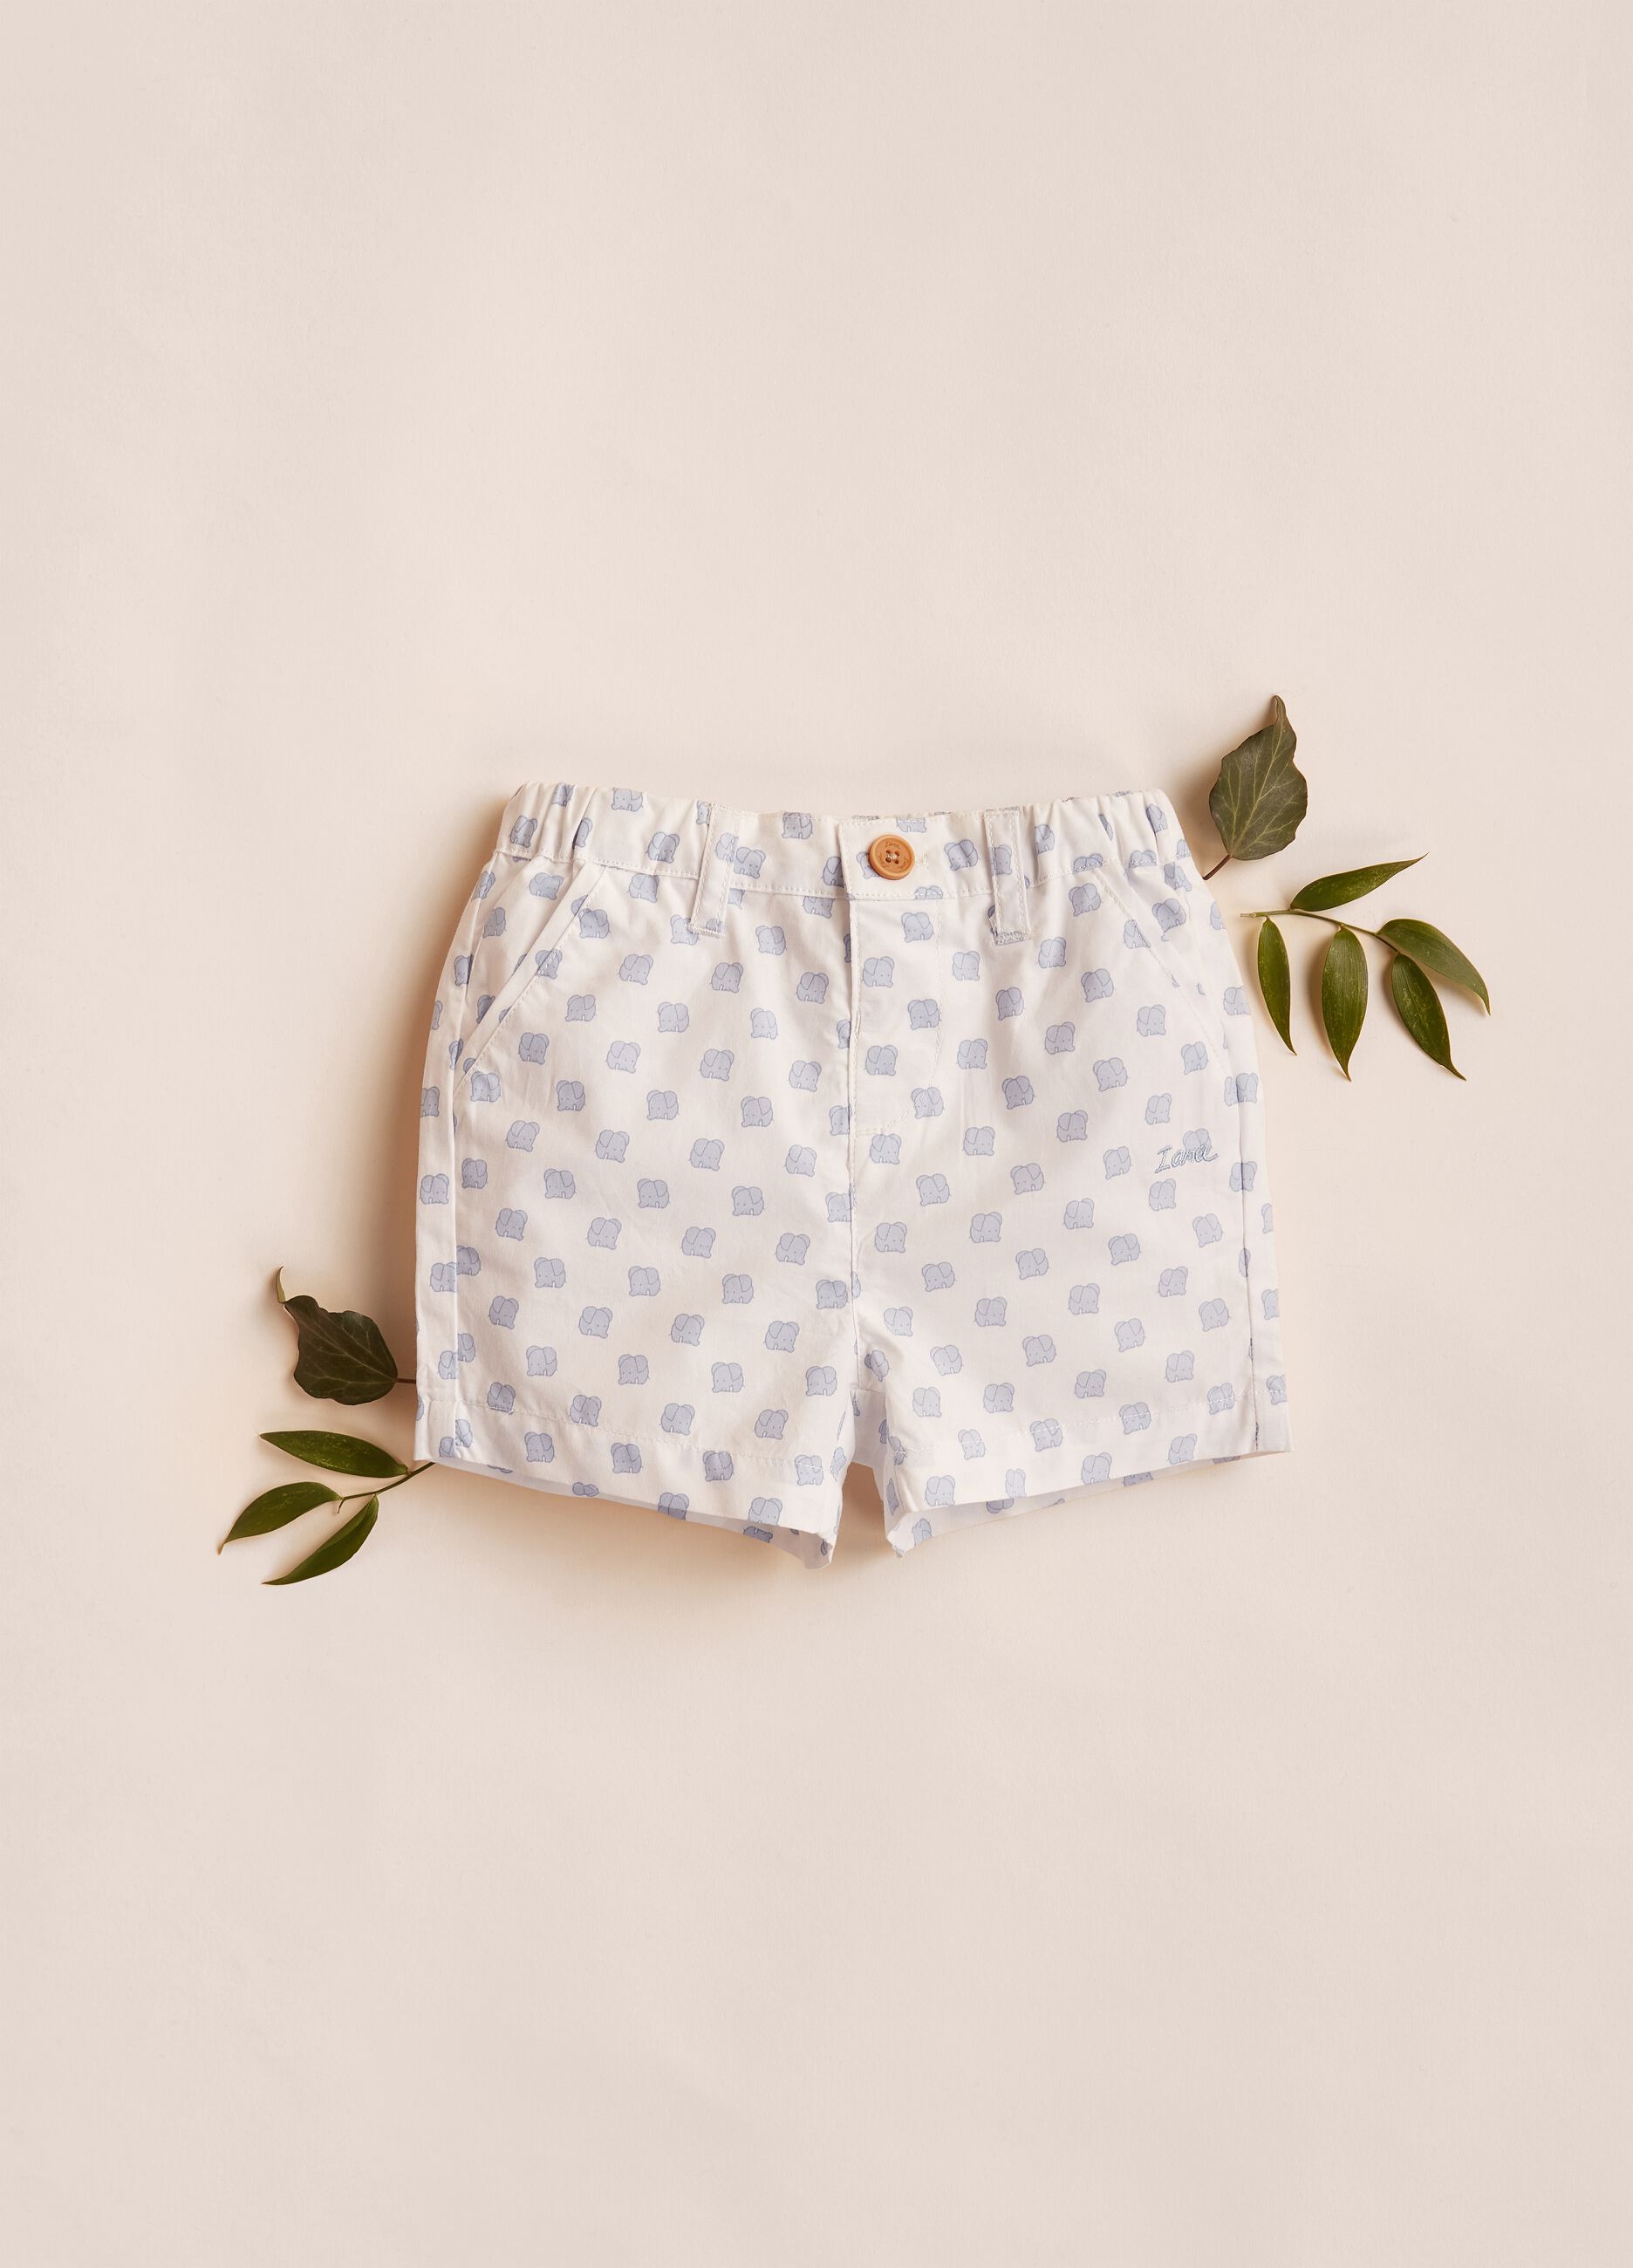 IANA patterned shorts in 100% cotton